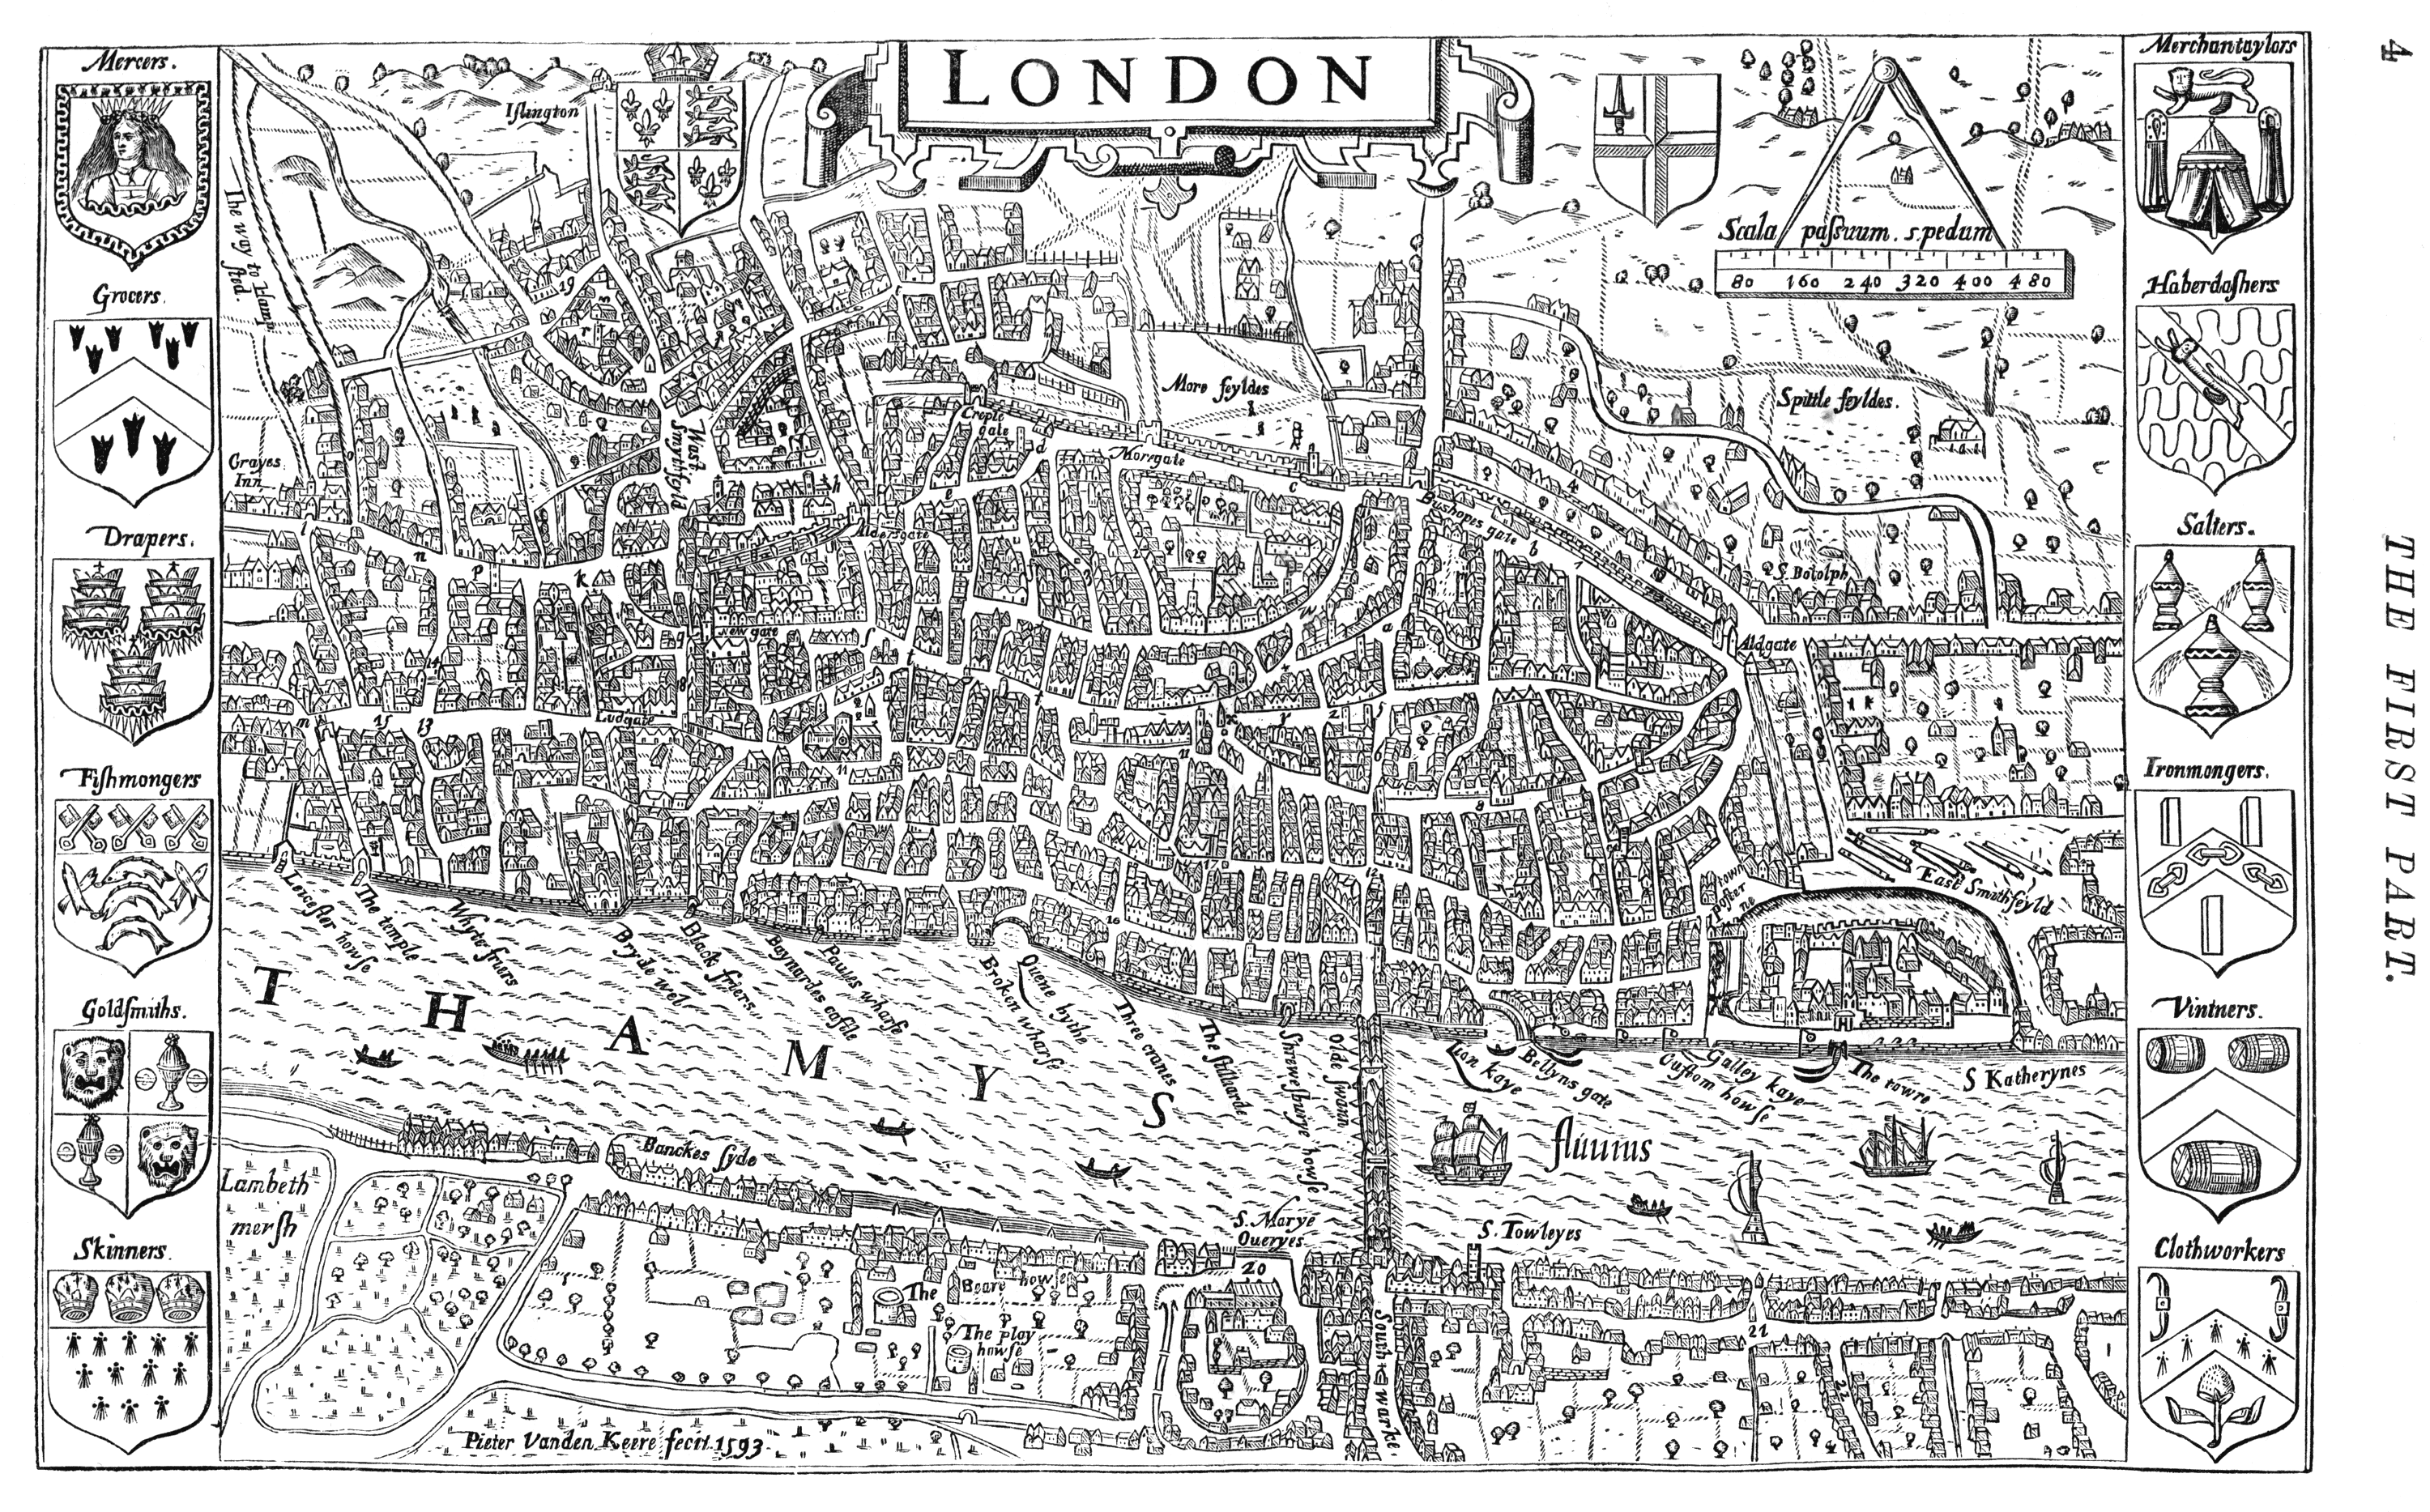 London, engraved by Pieter Vanden Keere in 1593, and in Halliwell taken from a fine original engraving.  From James Halliwell 'Illustrations of the life of Shakespeare' (1874), page 4, published size in Halliwell 24cm wide by 18cm high.